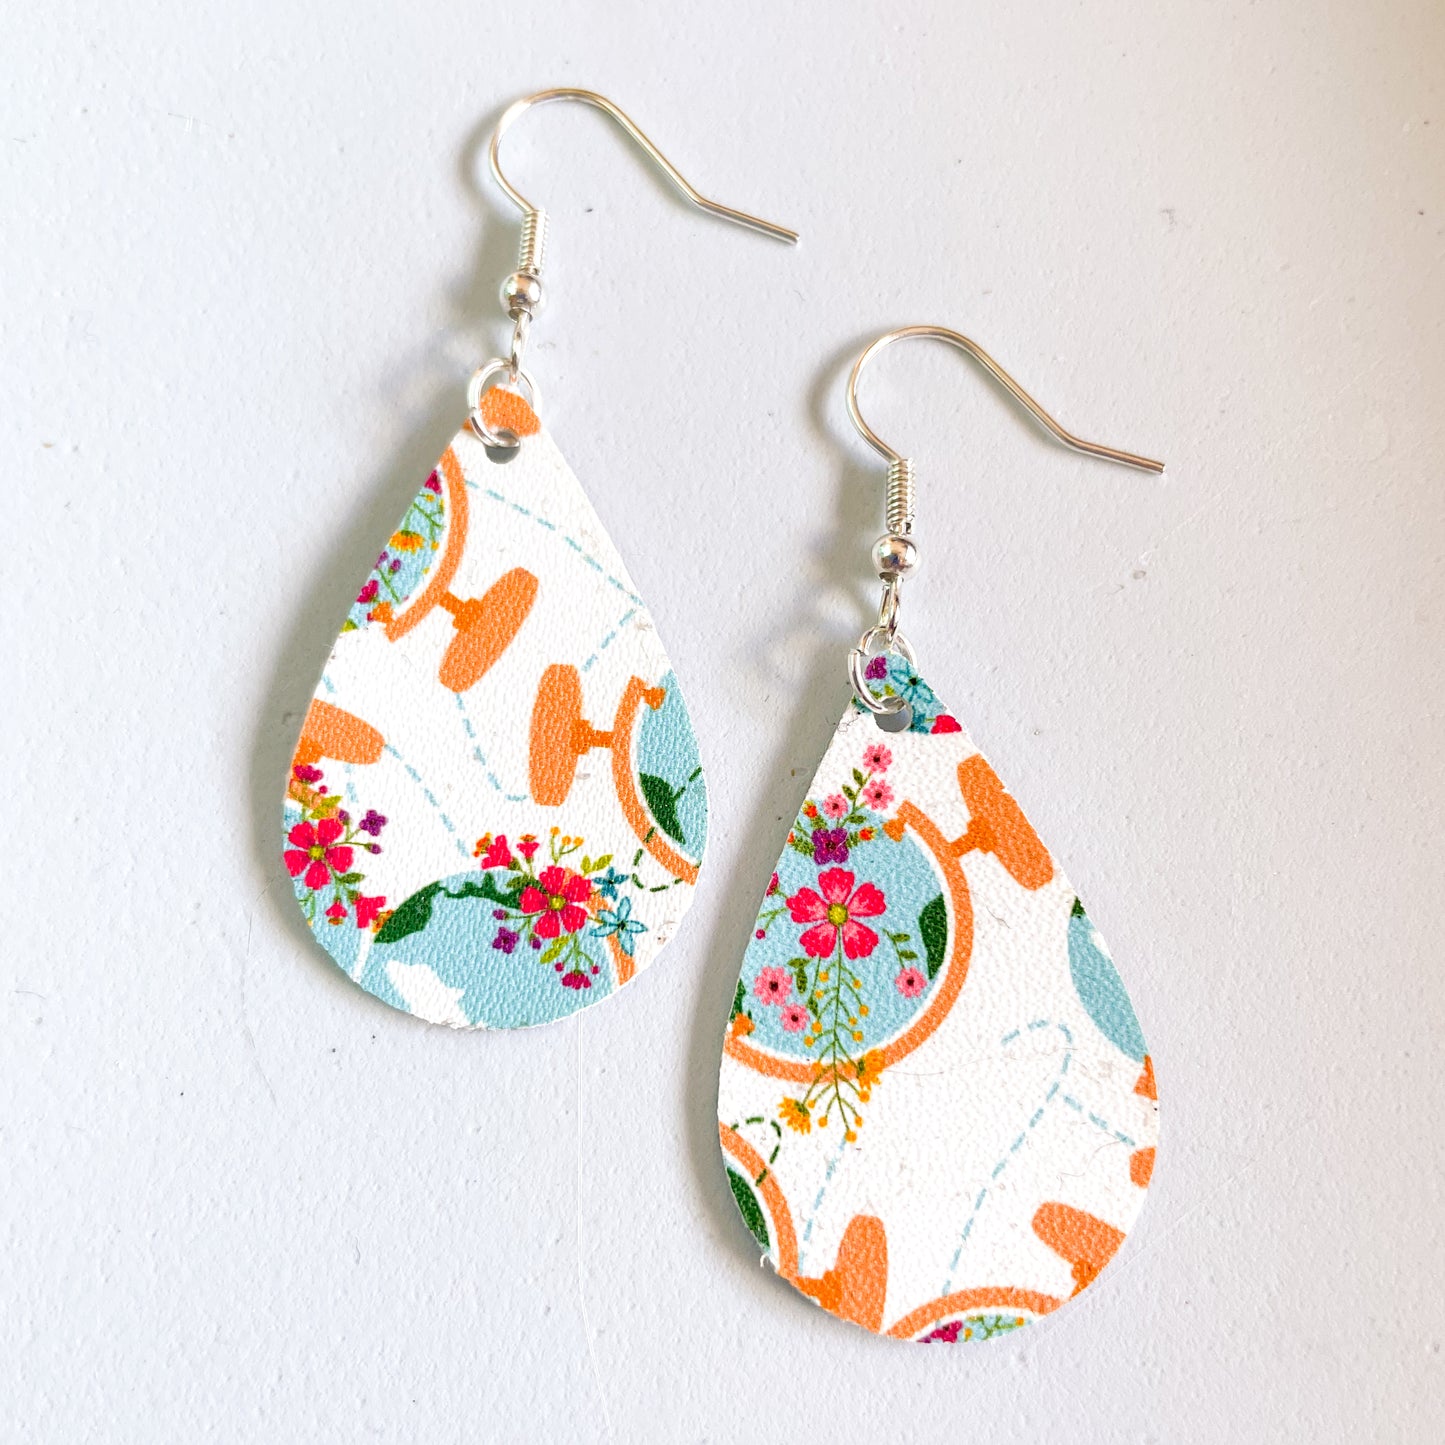 Travel the Globe Emily Style1 Layer Dangle Earrings | Emily Style Dangle Earrings | Layered Teardrop Shape | Teal Floral Globes